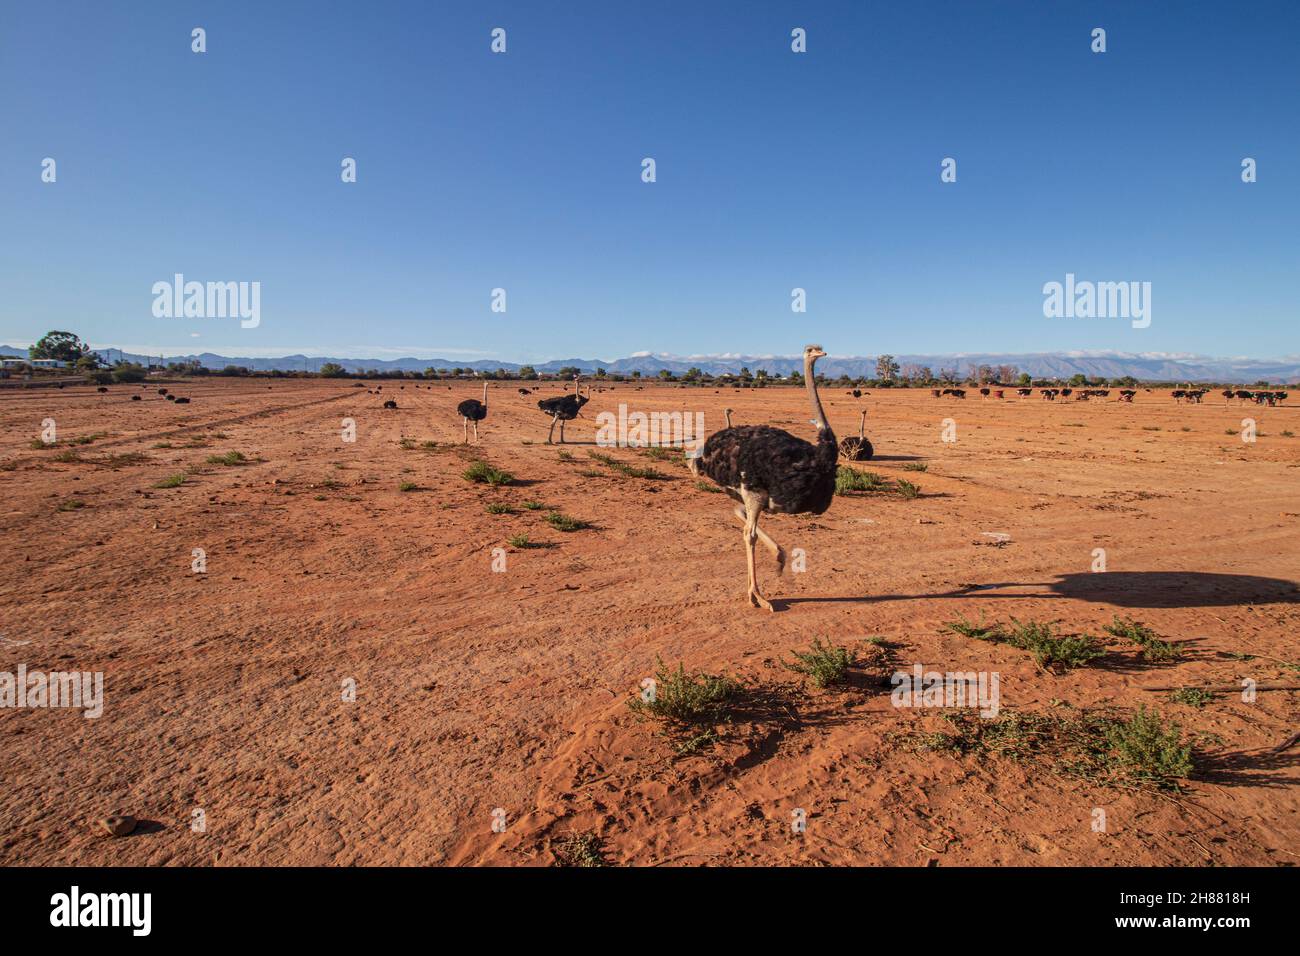 Ostriches in a farm at Oudshoorn in Western Cape, South Africa which has being renown as ostrich capital of the world. Stock Photo